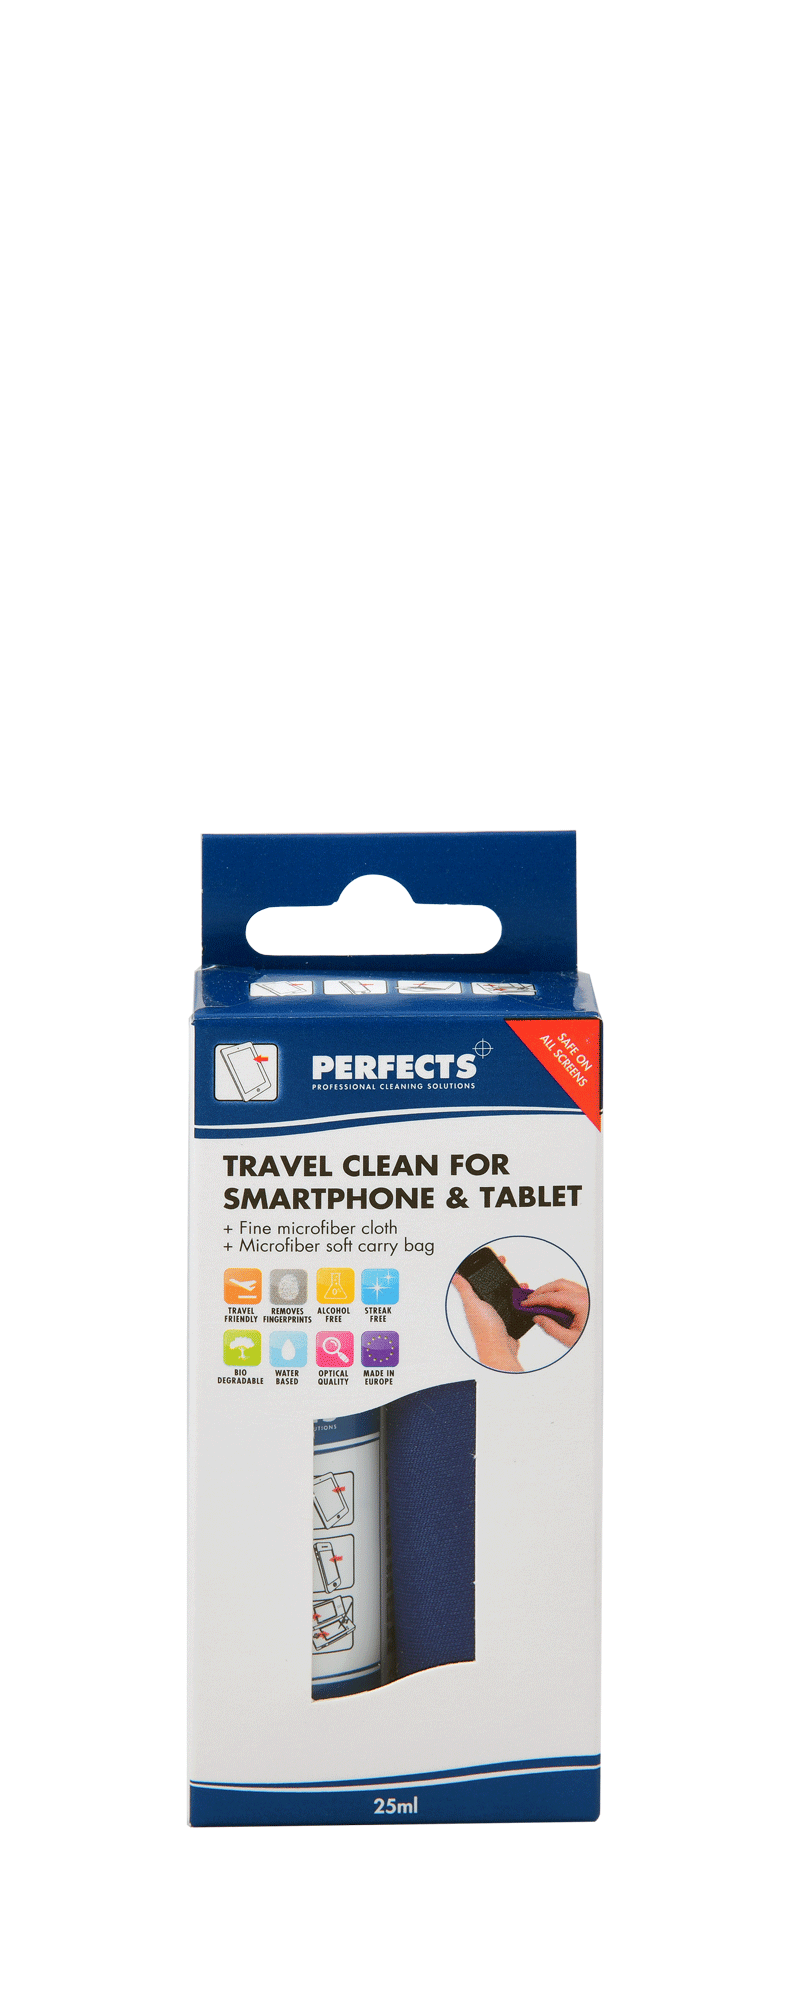 Travel Clean for Smartphone & Tablet